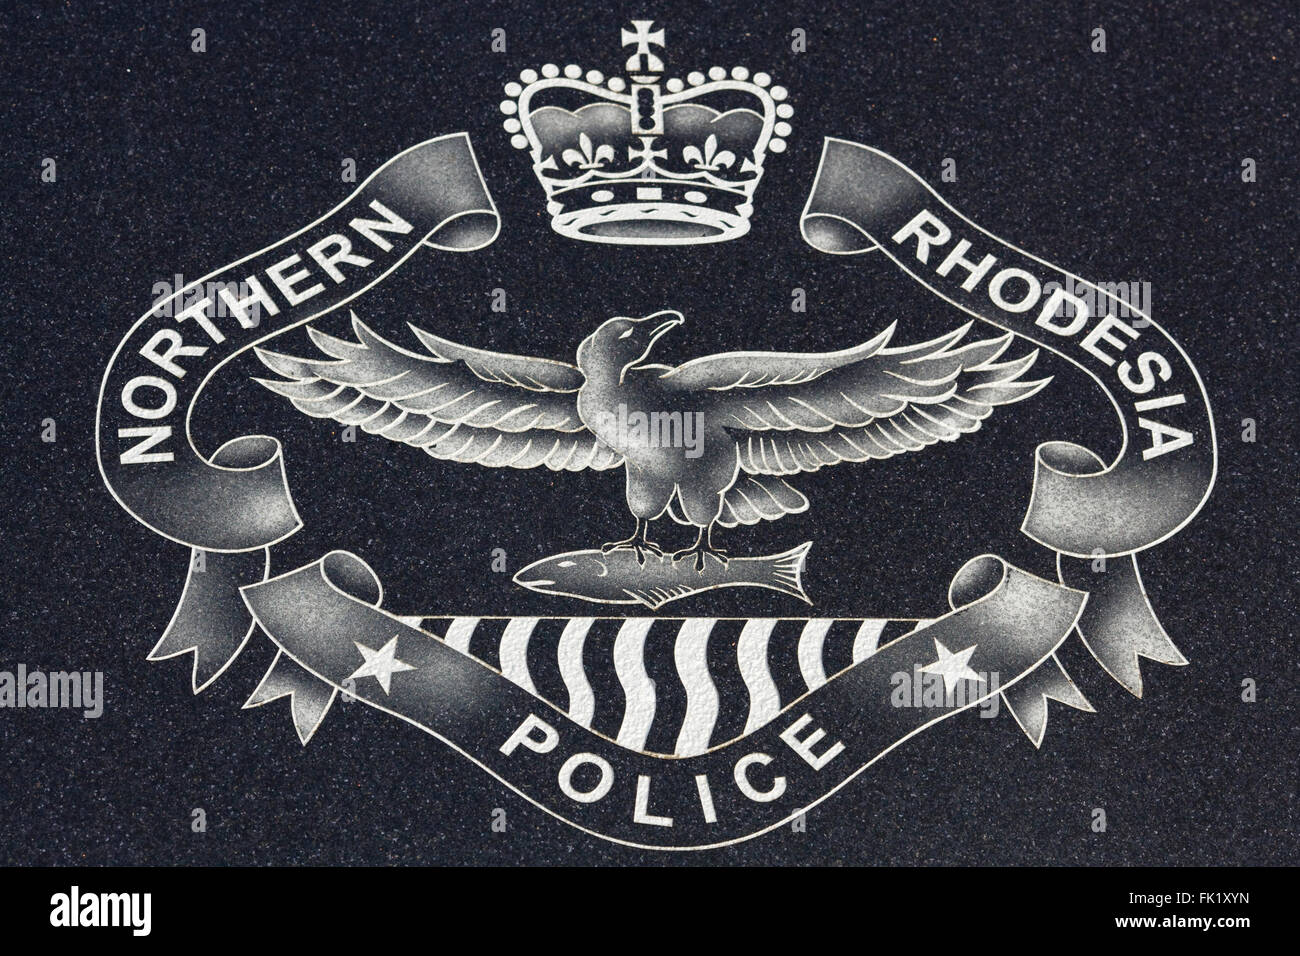 Remembering the Armed forces, Badges and shields of the Northern police Rhodia Police Force Stock Photo